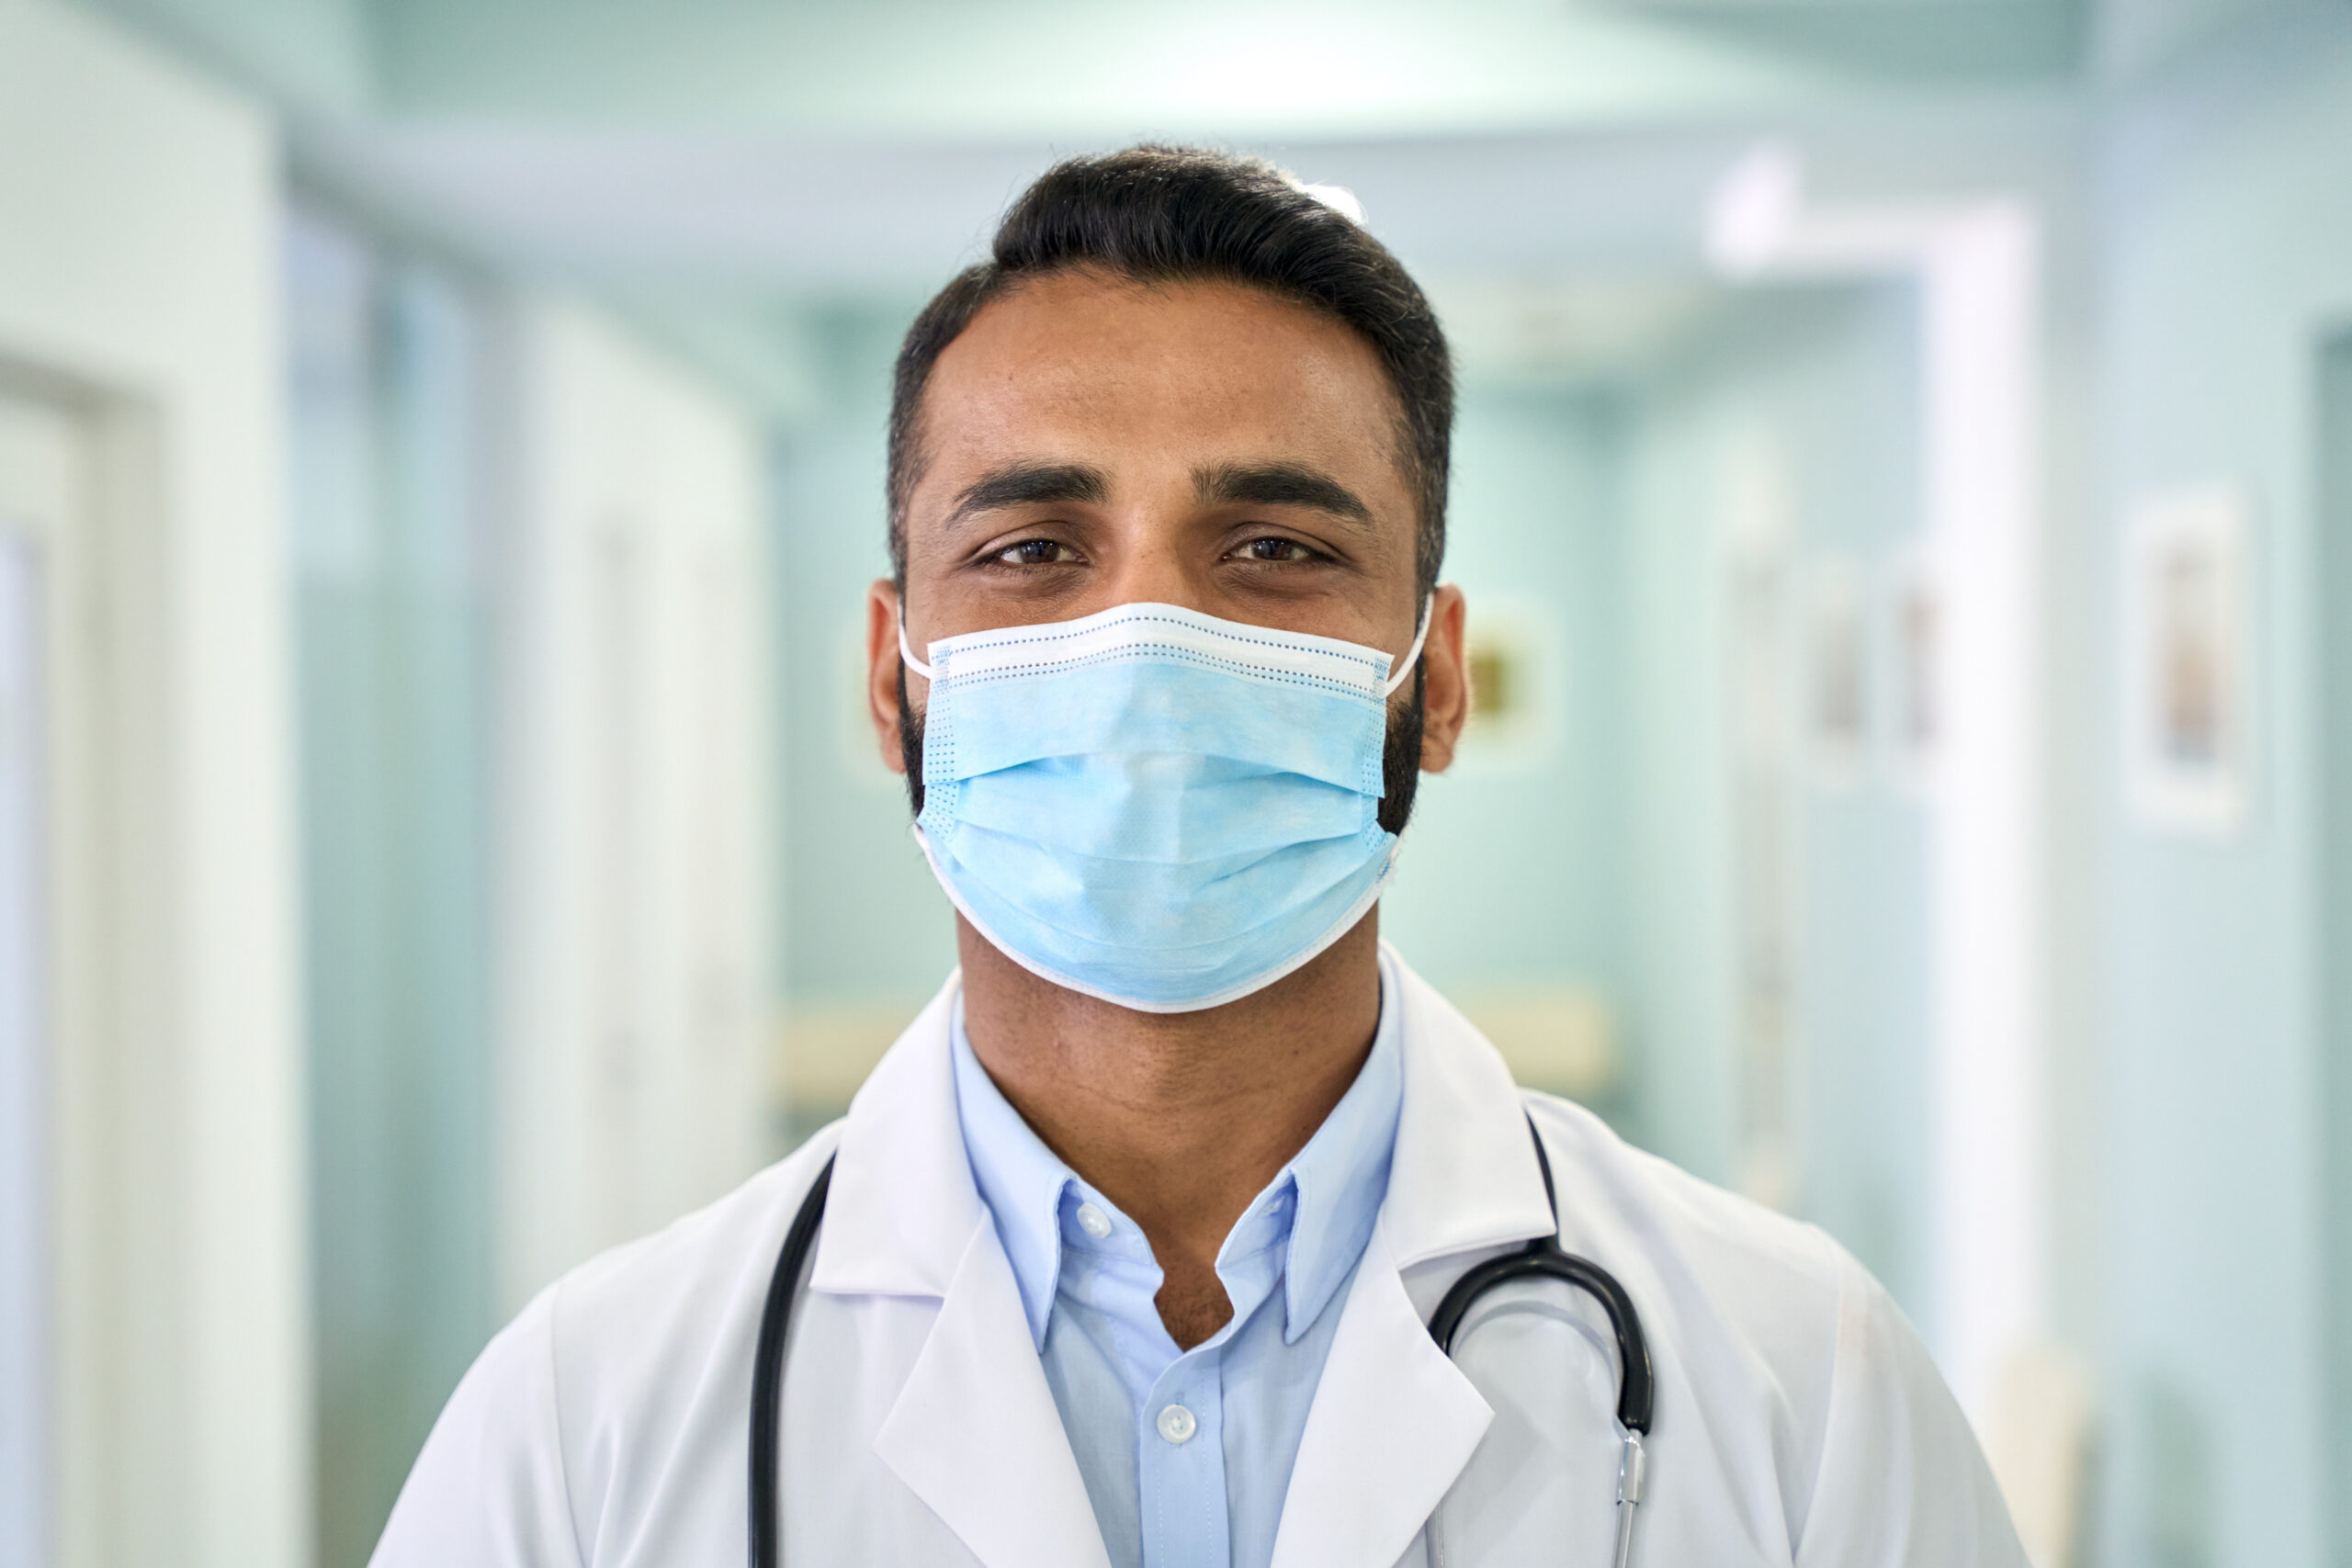 Male Indian doctor wearing medical coat and face mask looking at camera.